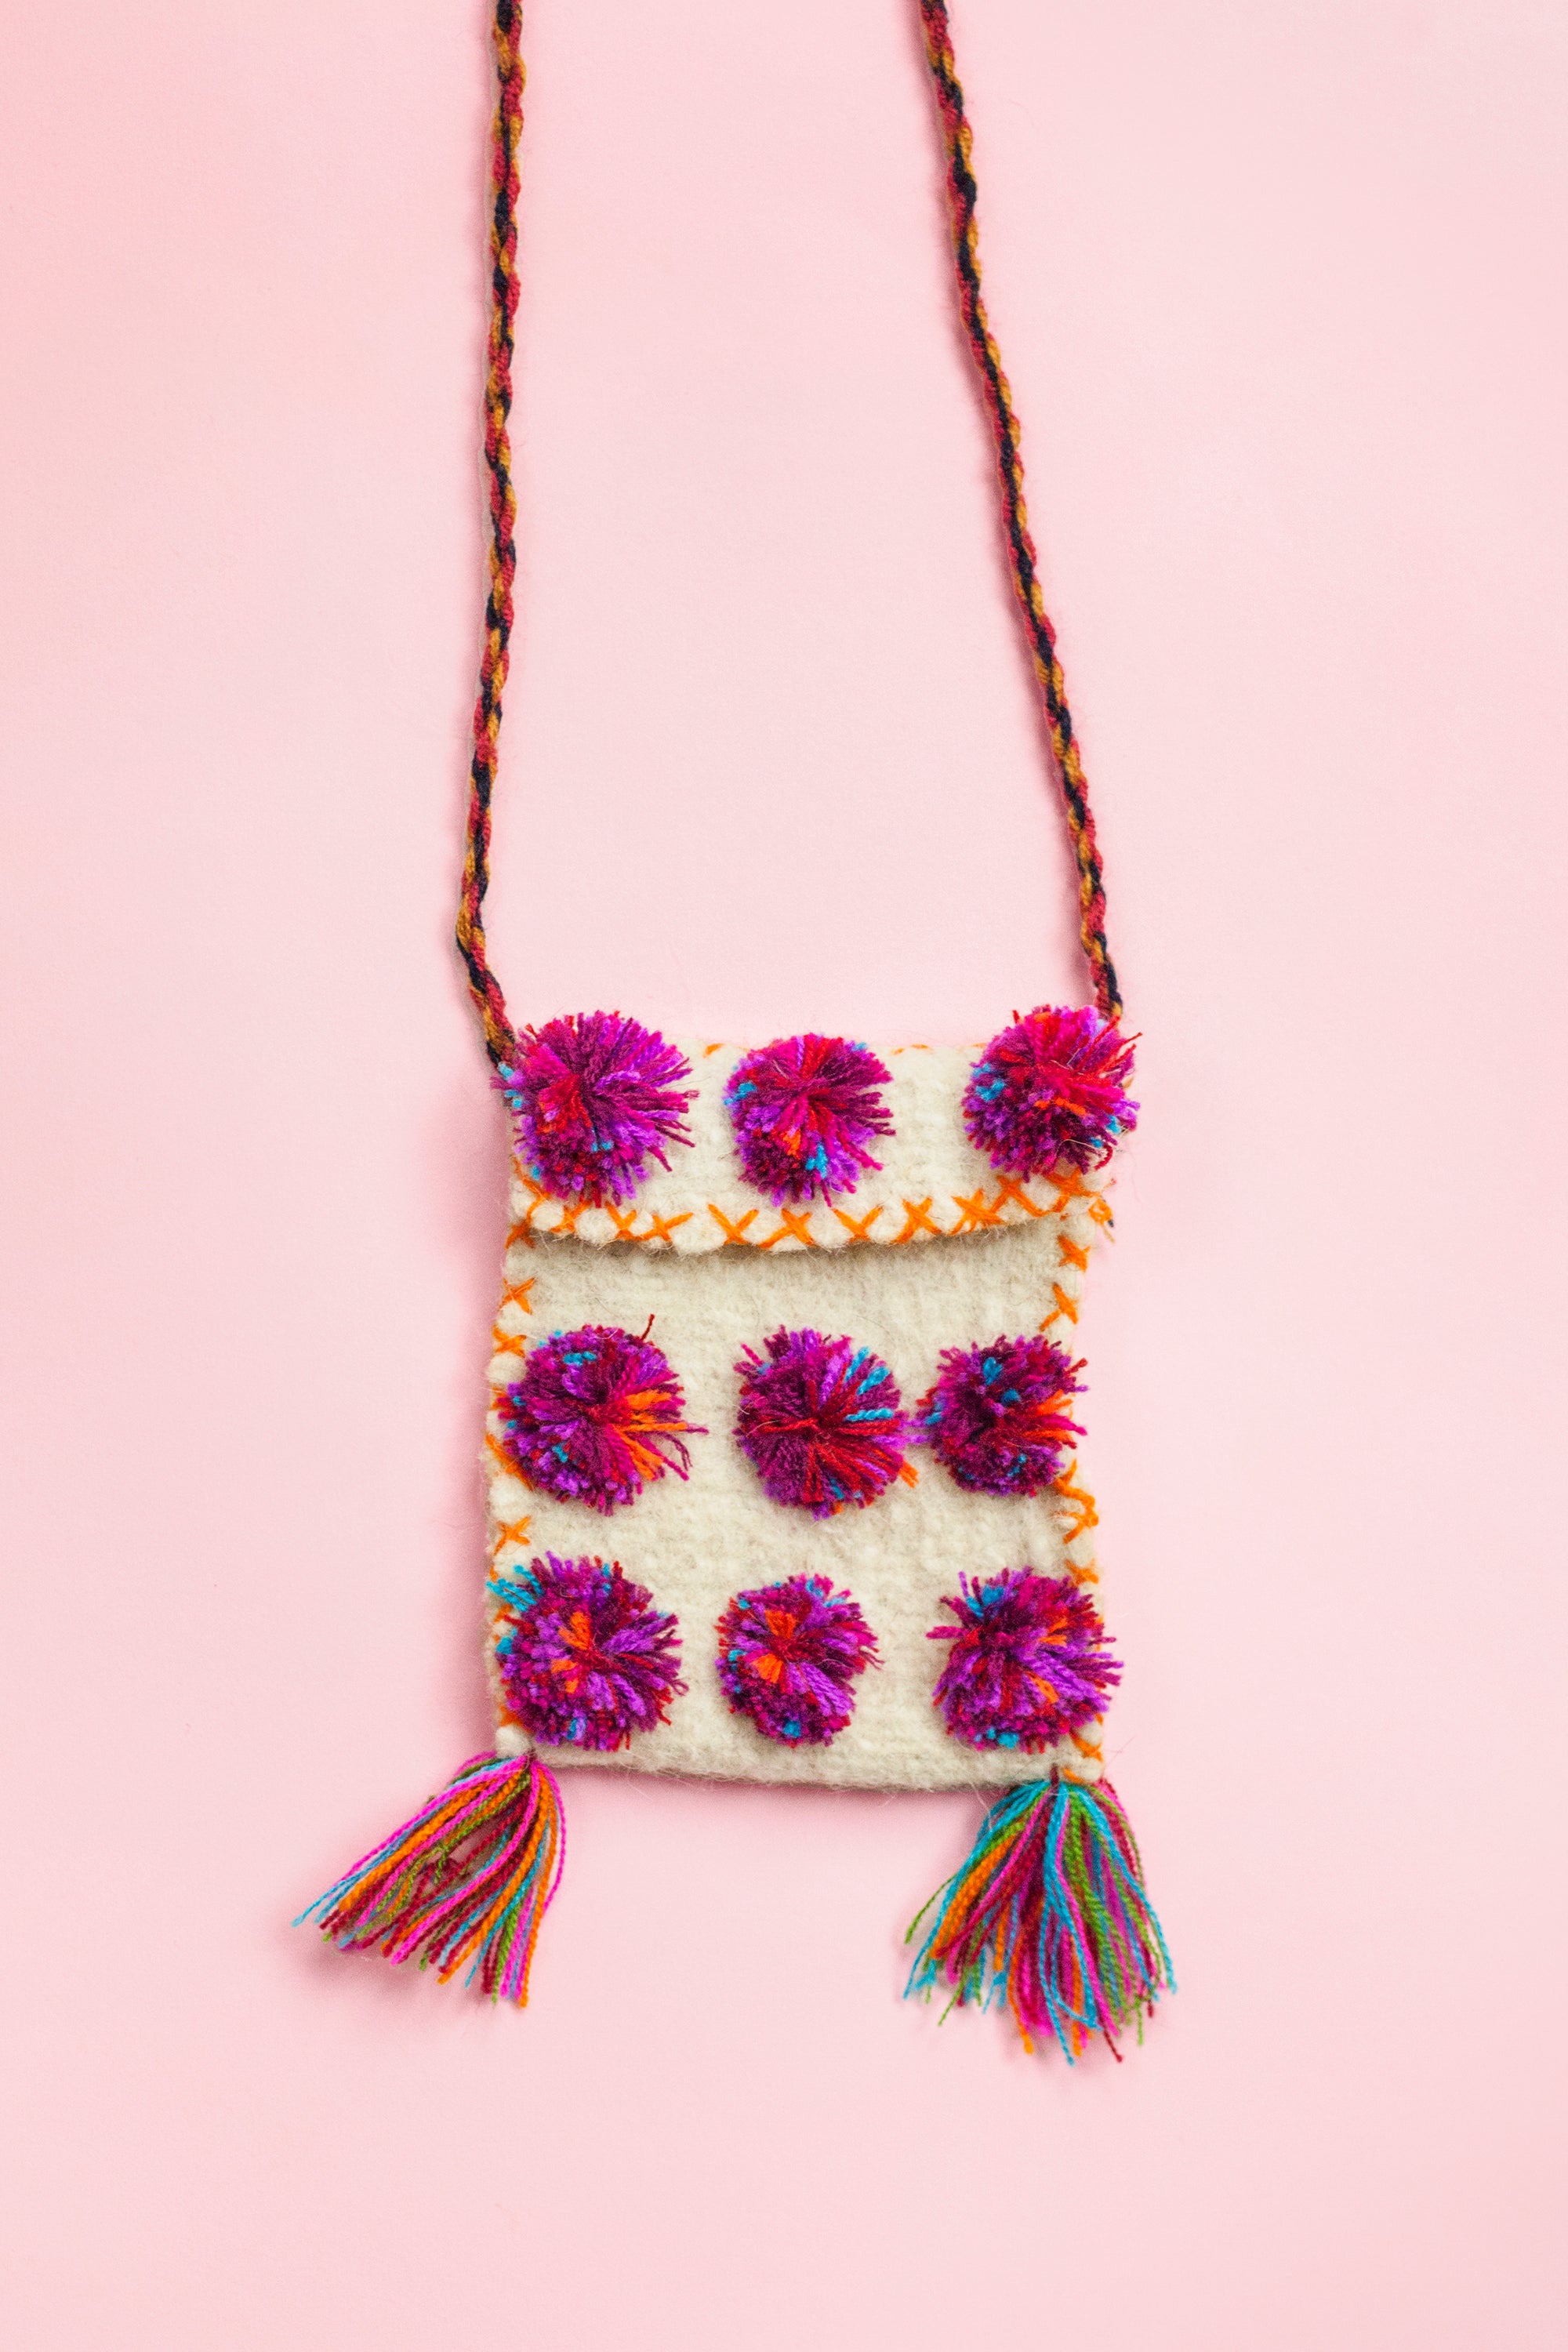 White wool satchel covered in three rows of multicolor pom poms. There is colorful cross stitching around the bag body, two small multicolor fringe tassels at the bottom corners, and a multicolor braided strap holding it up.